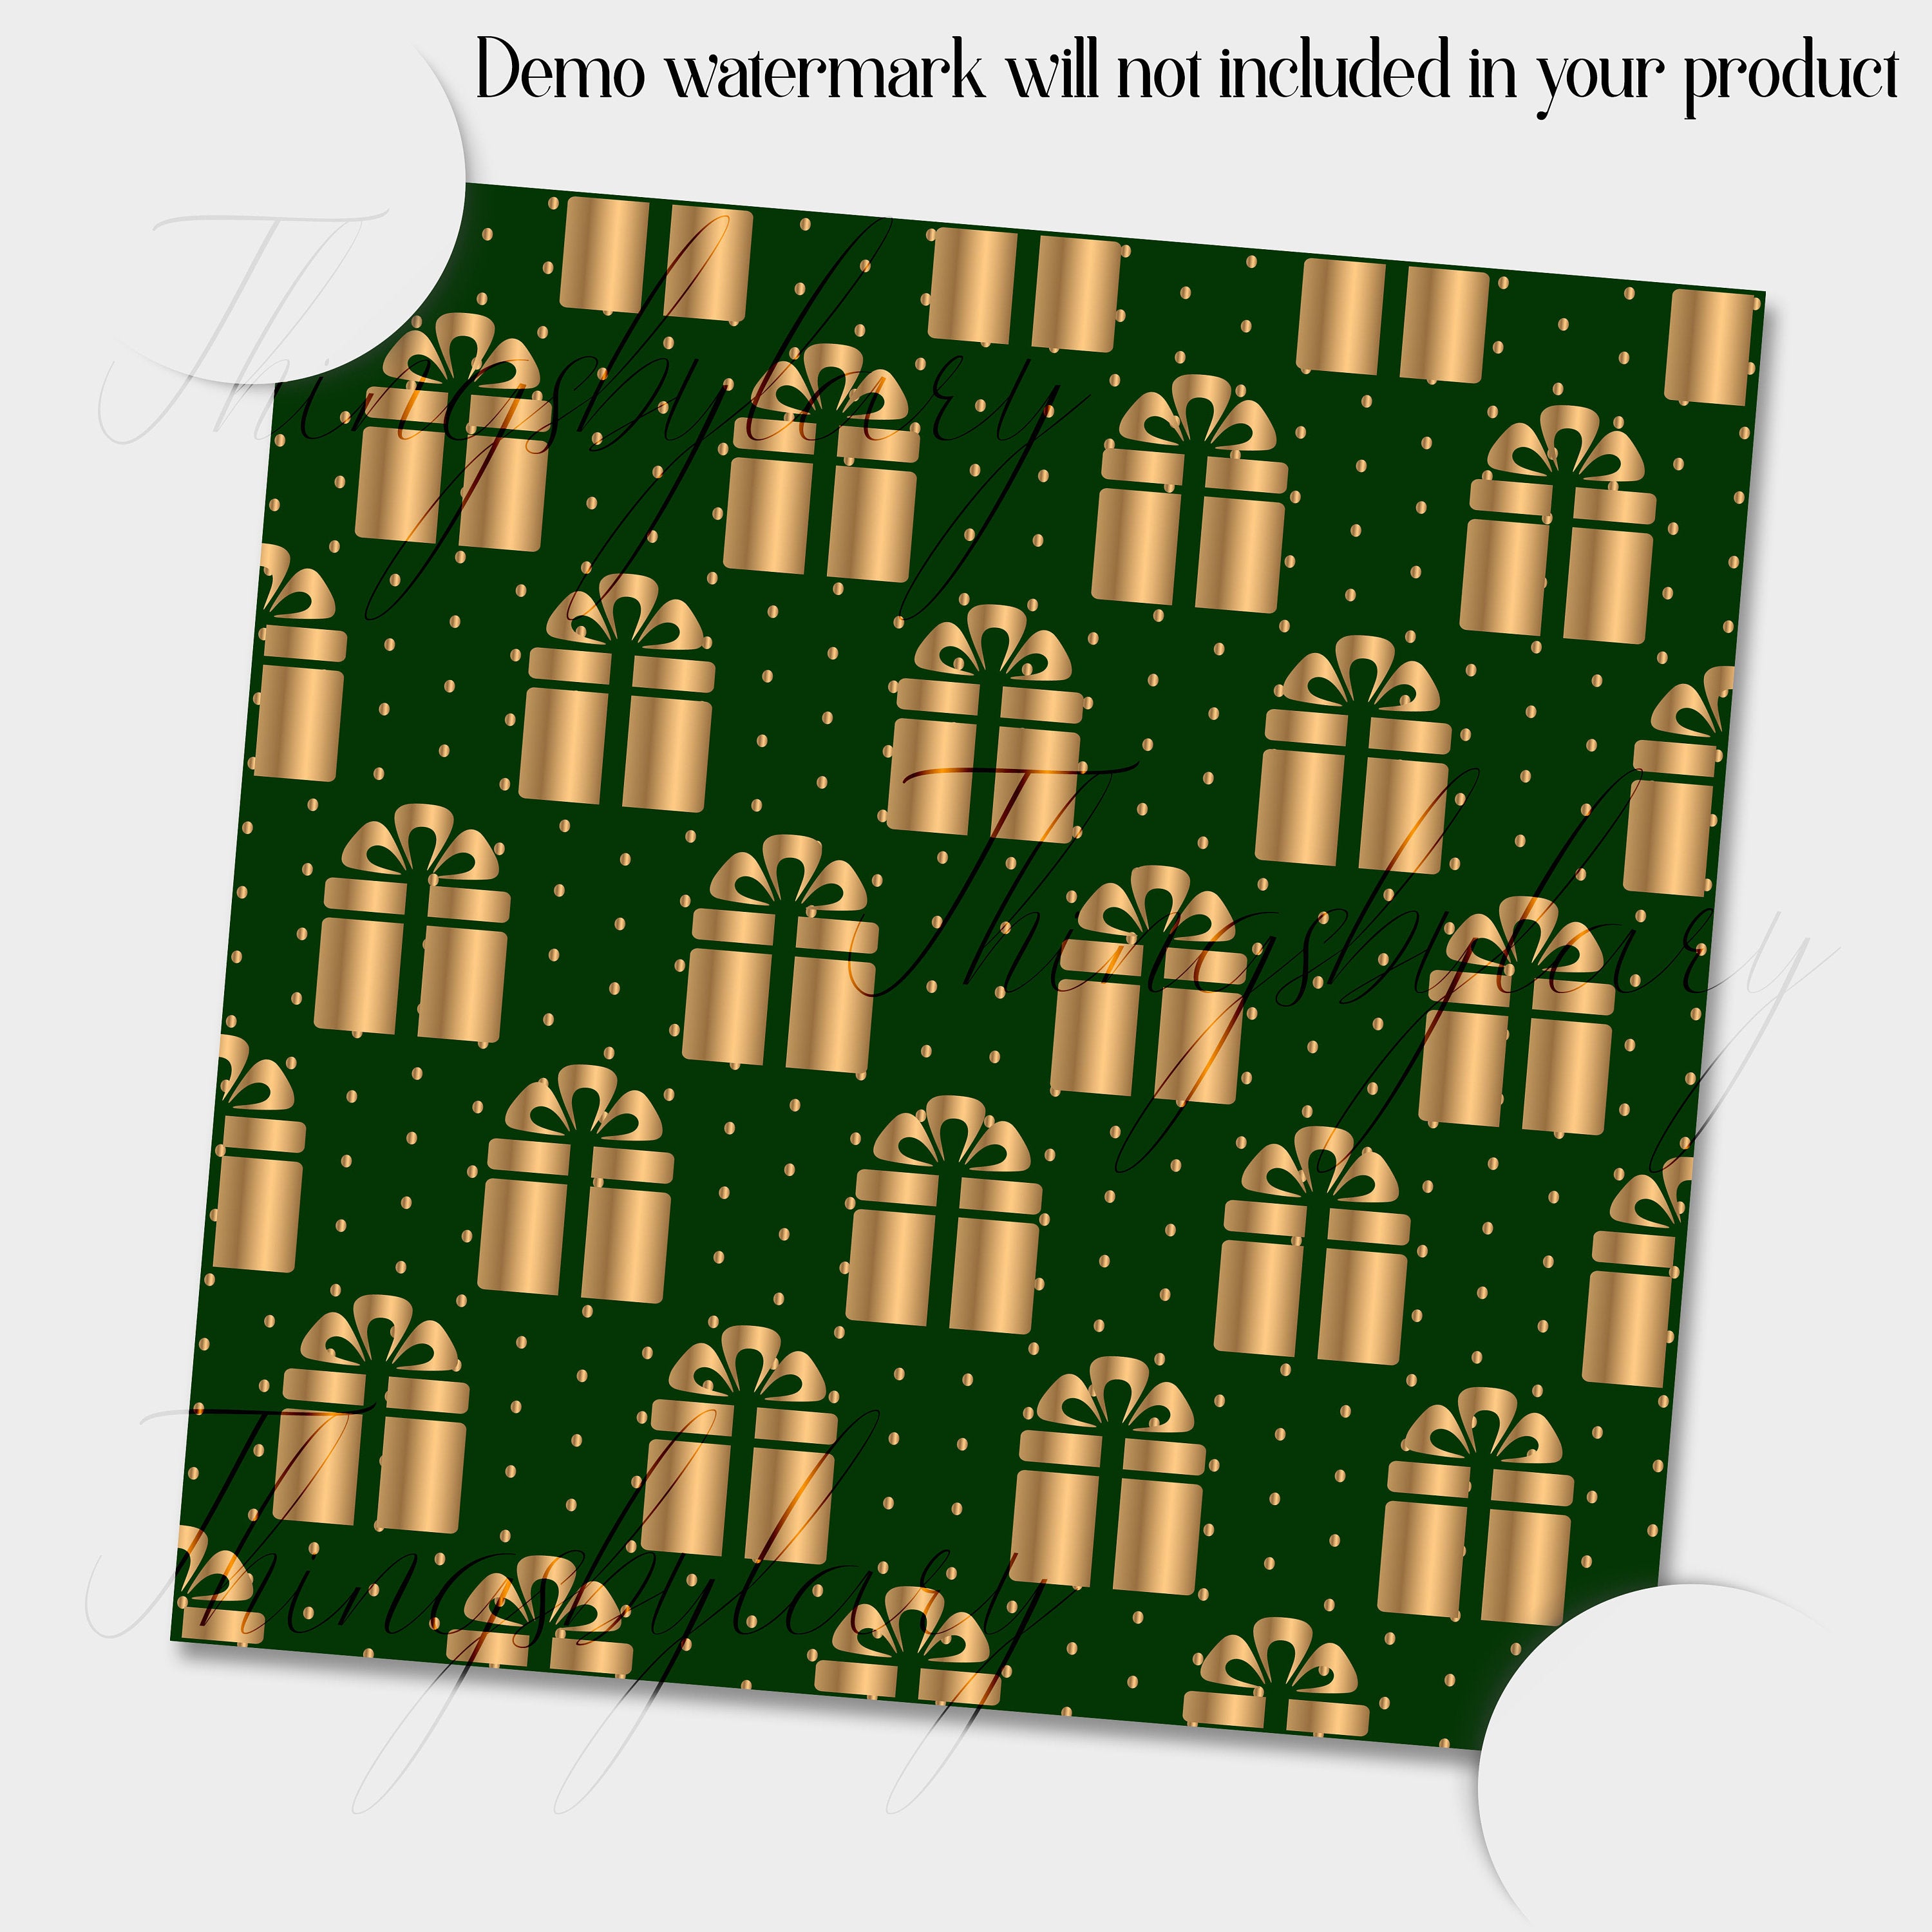 24 Green & Gold Christmas Digital Papers 12 x 12 inch 300 Dpi Instant Download, Scrapbook Papers, Christmas Papers, Commercial Use